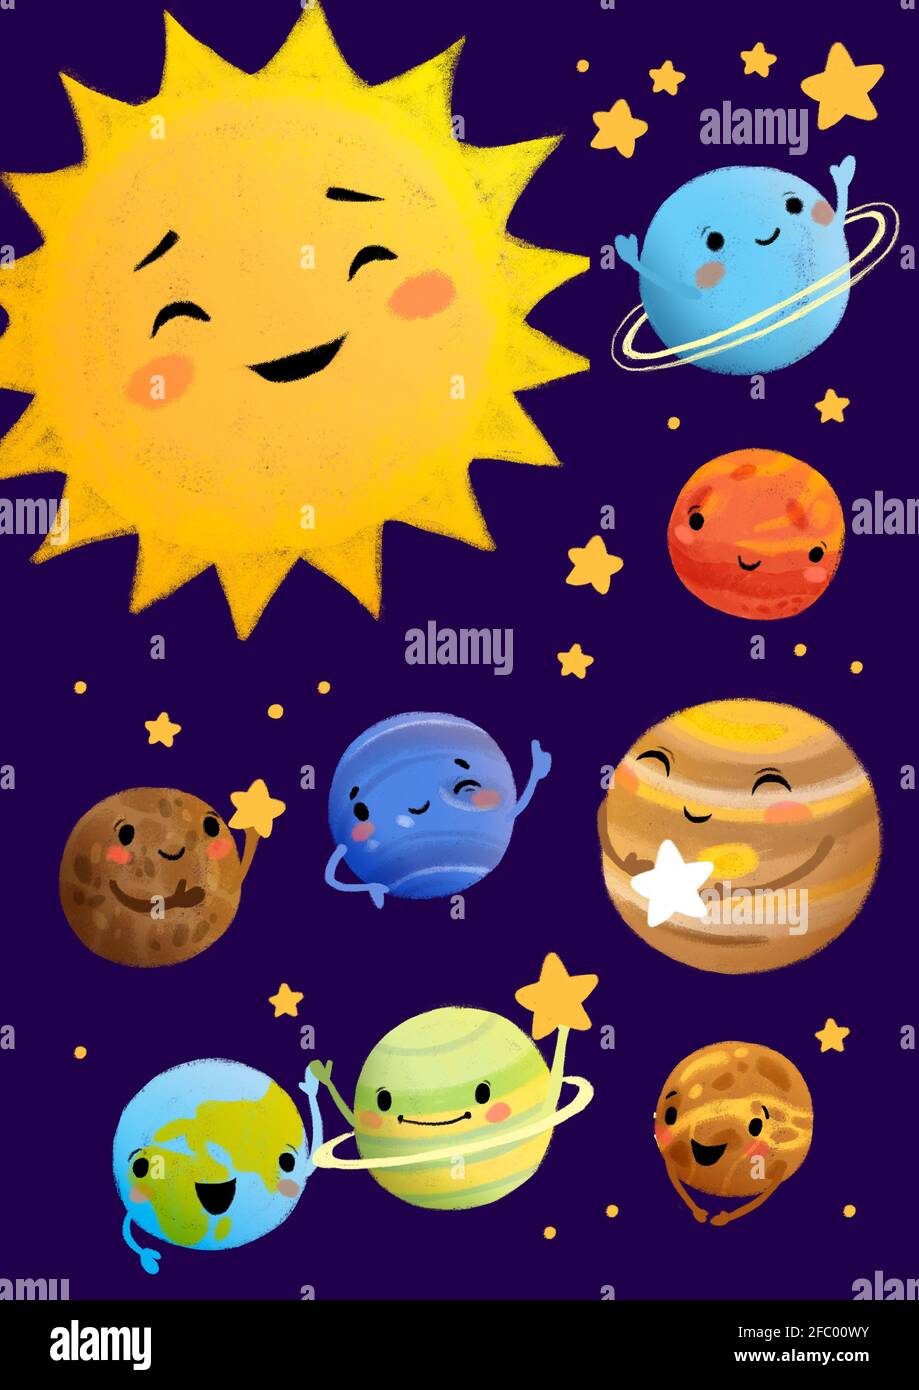 Cute Solar System poster on dark background. Set of planets hand drawn